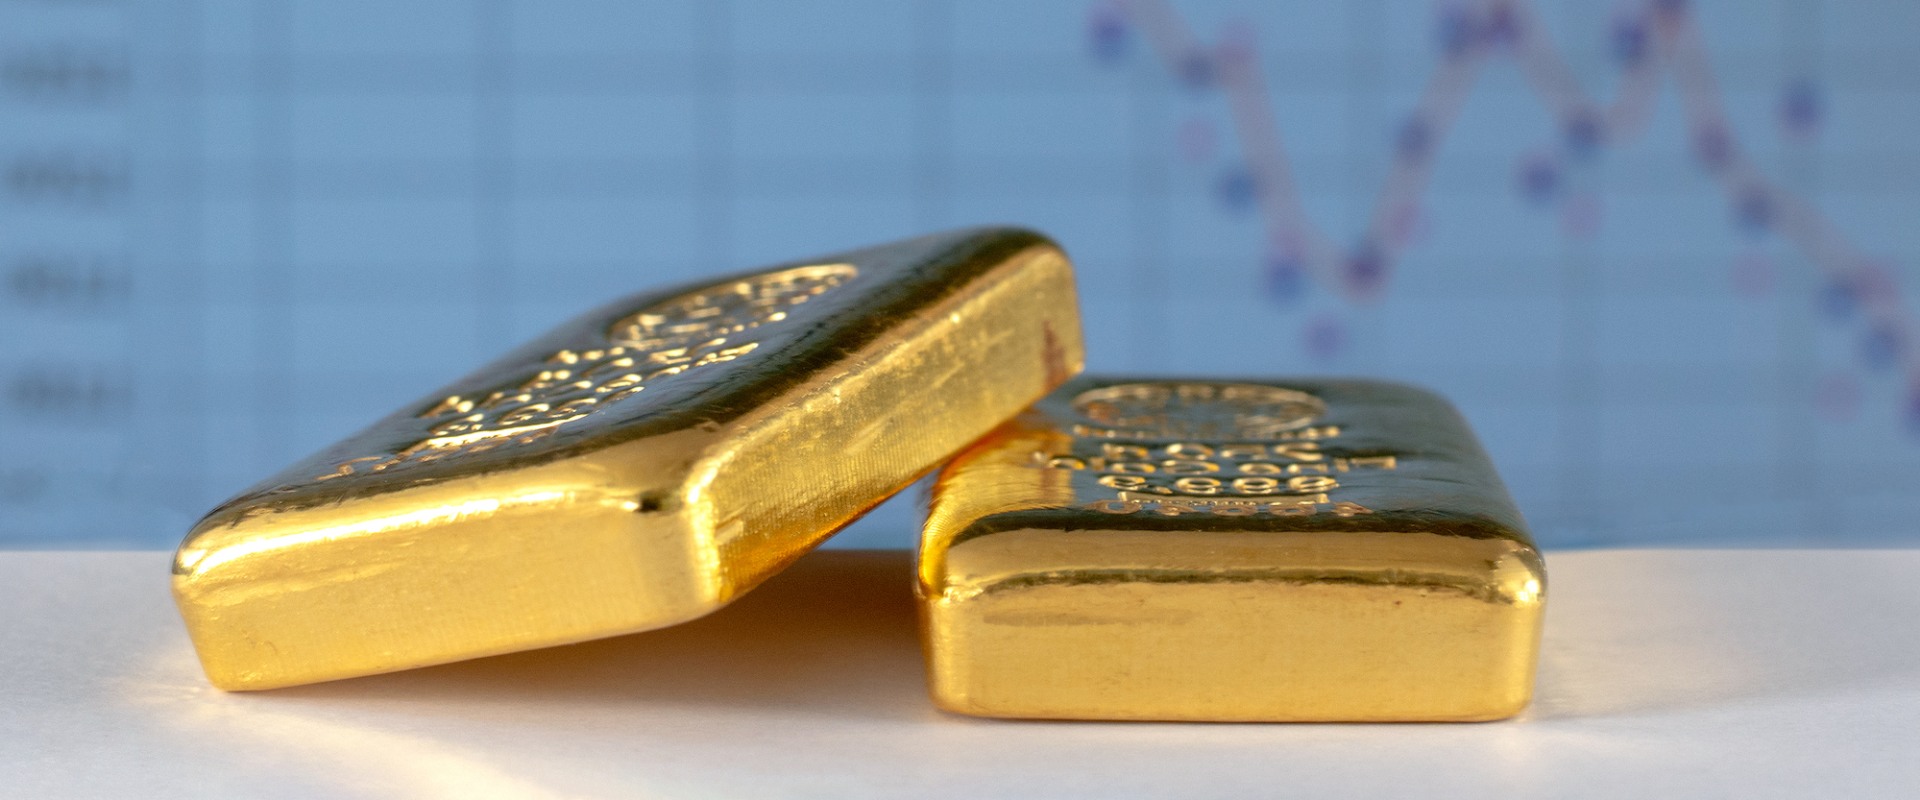 Why is gold important in a portfolio?